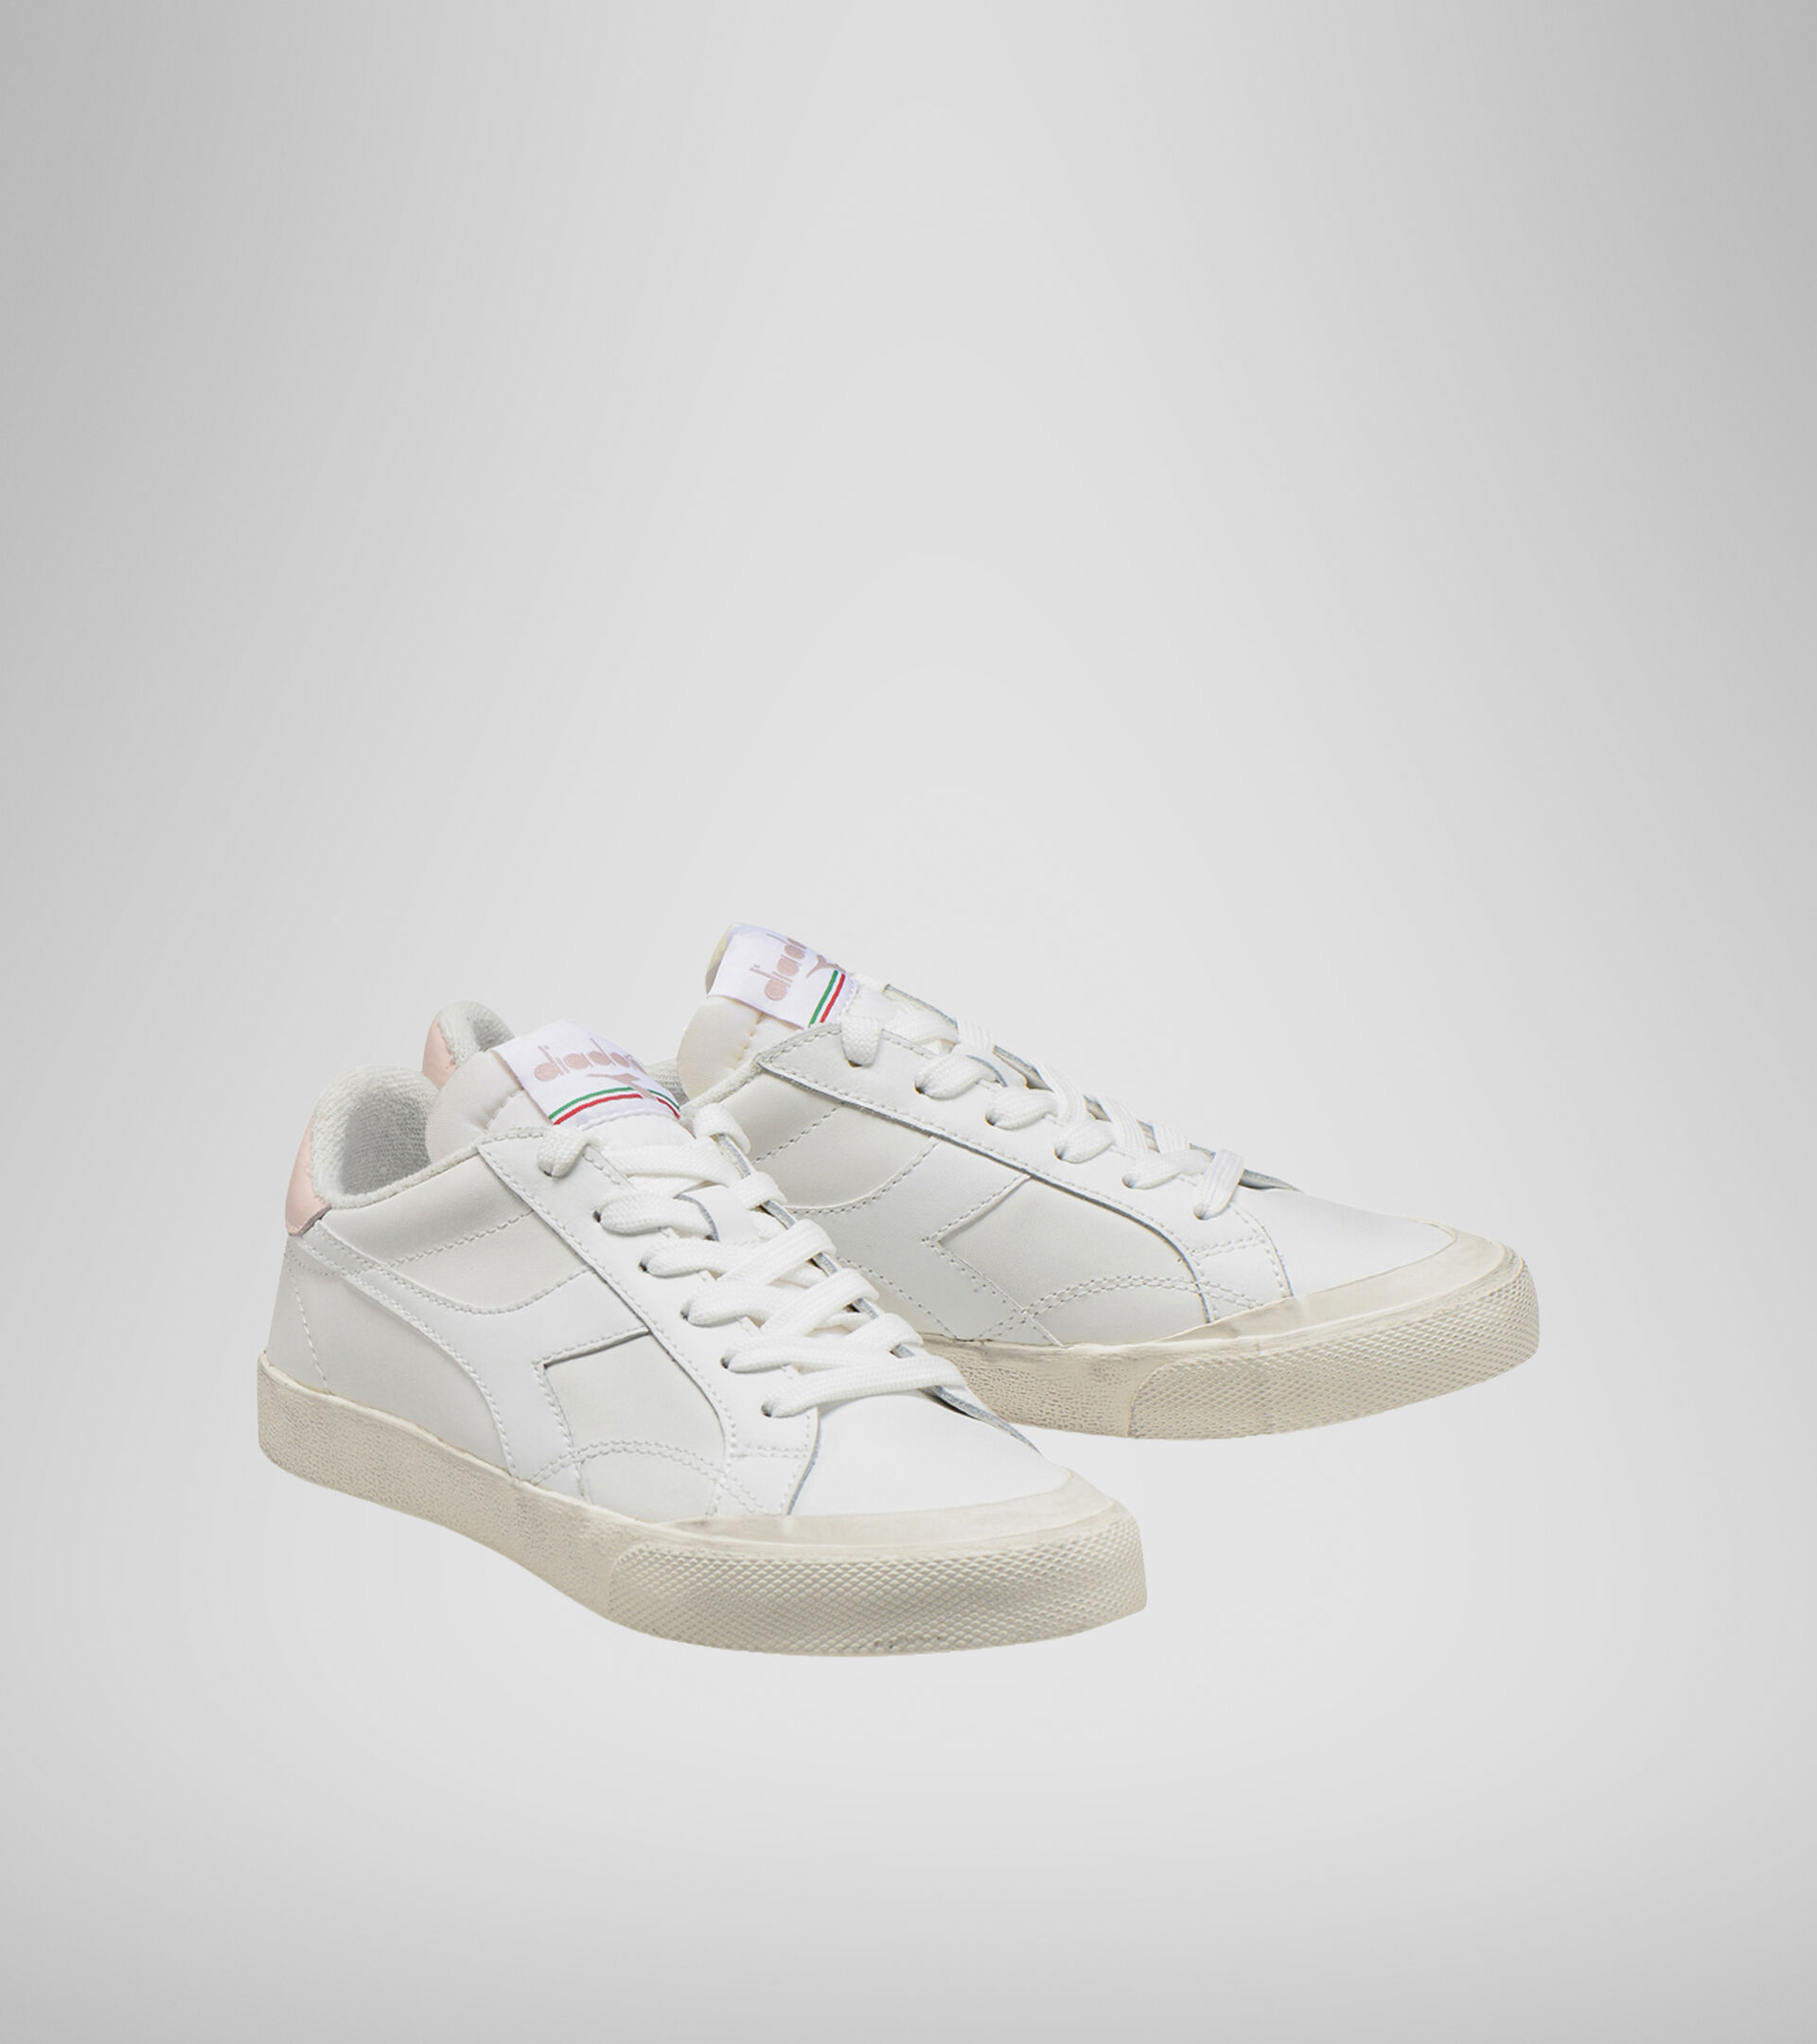 Chaussures de sport - Unisexe MELODY LEATHER DIRTY BIANCO/ROSA NUVOLA - Diadora